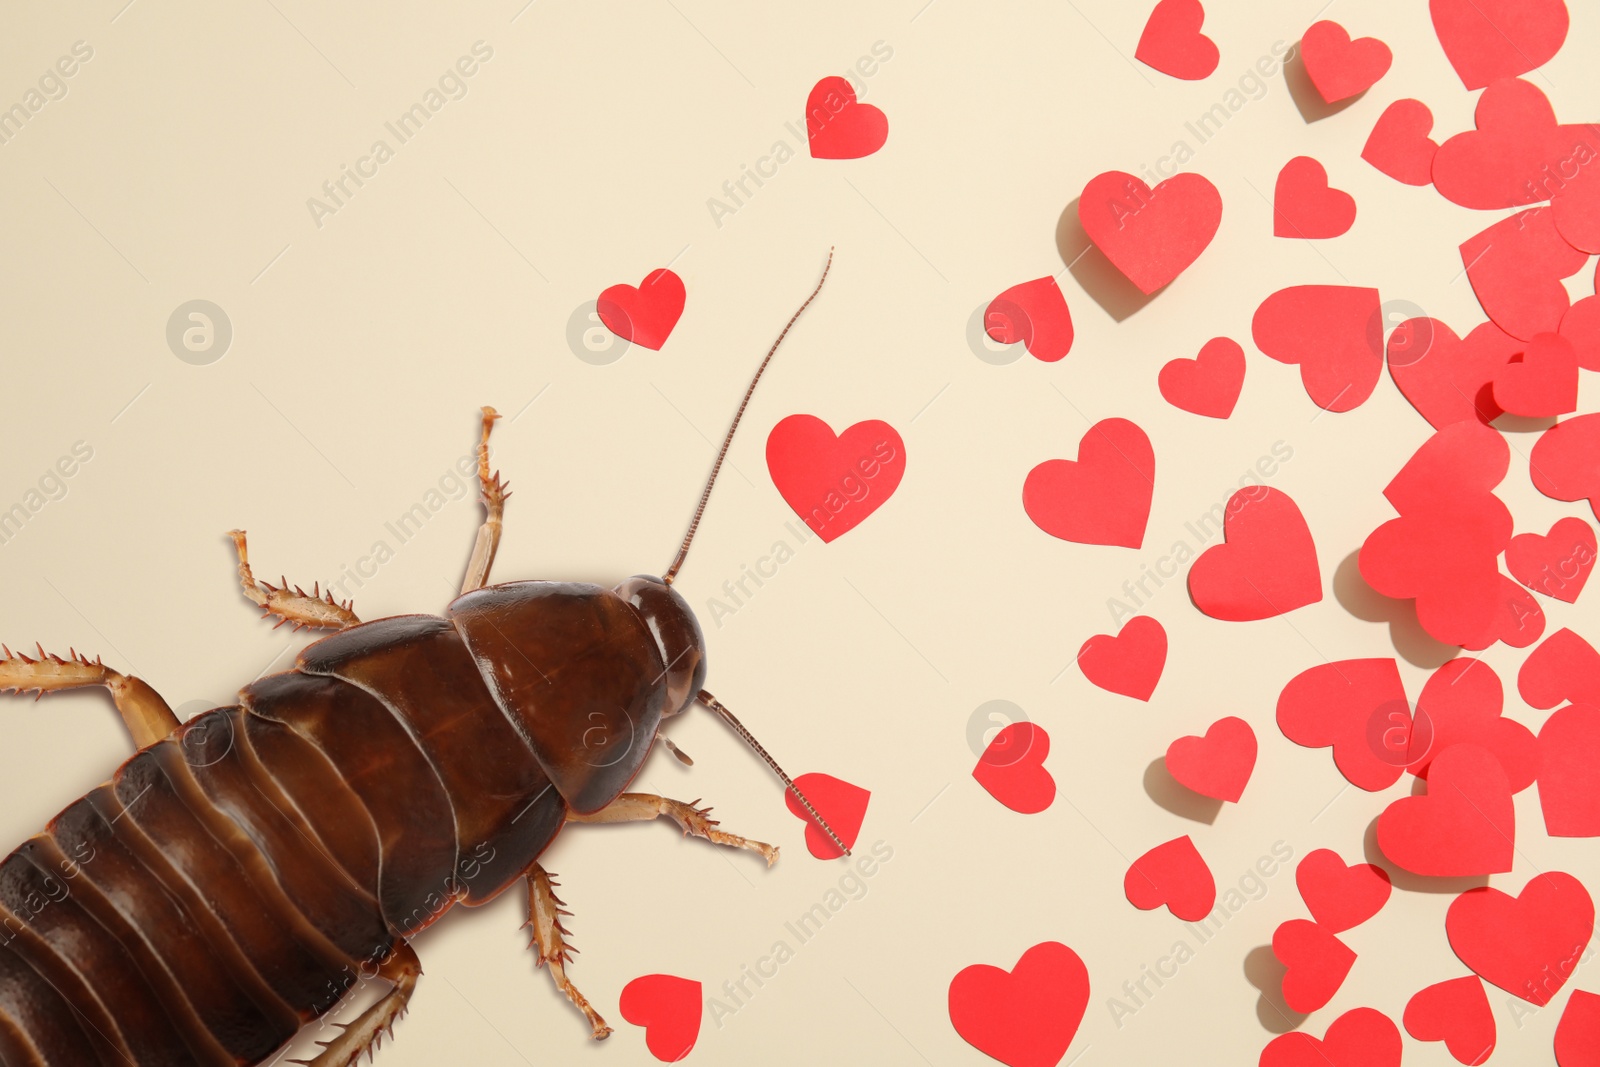 Image of Valentine's Day Promotion Name Roach - QUIT BUGGING ME. Cockroach and small paper hearts on beige background, flat lay 